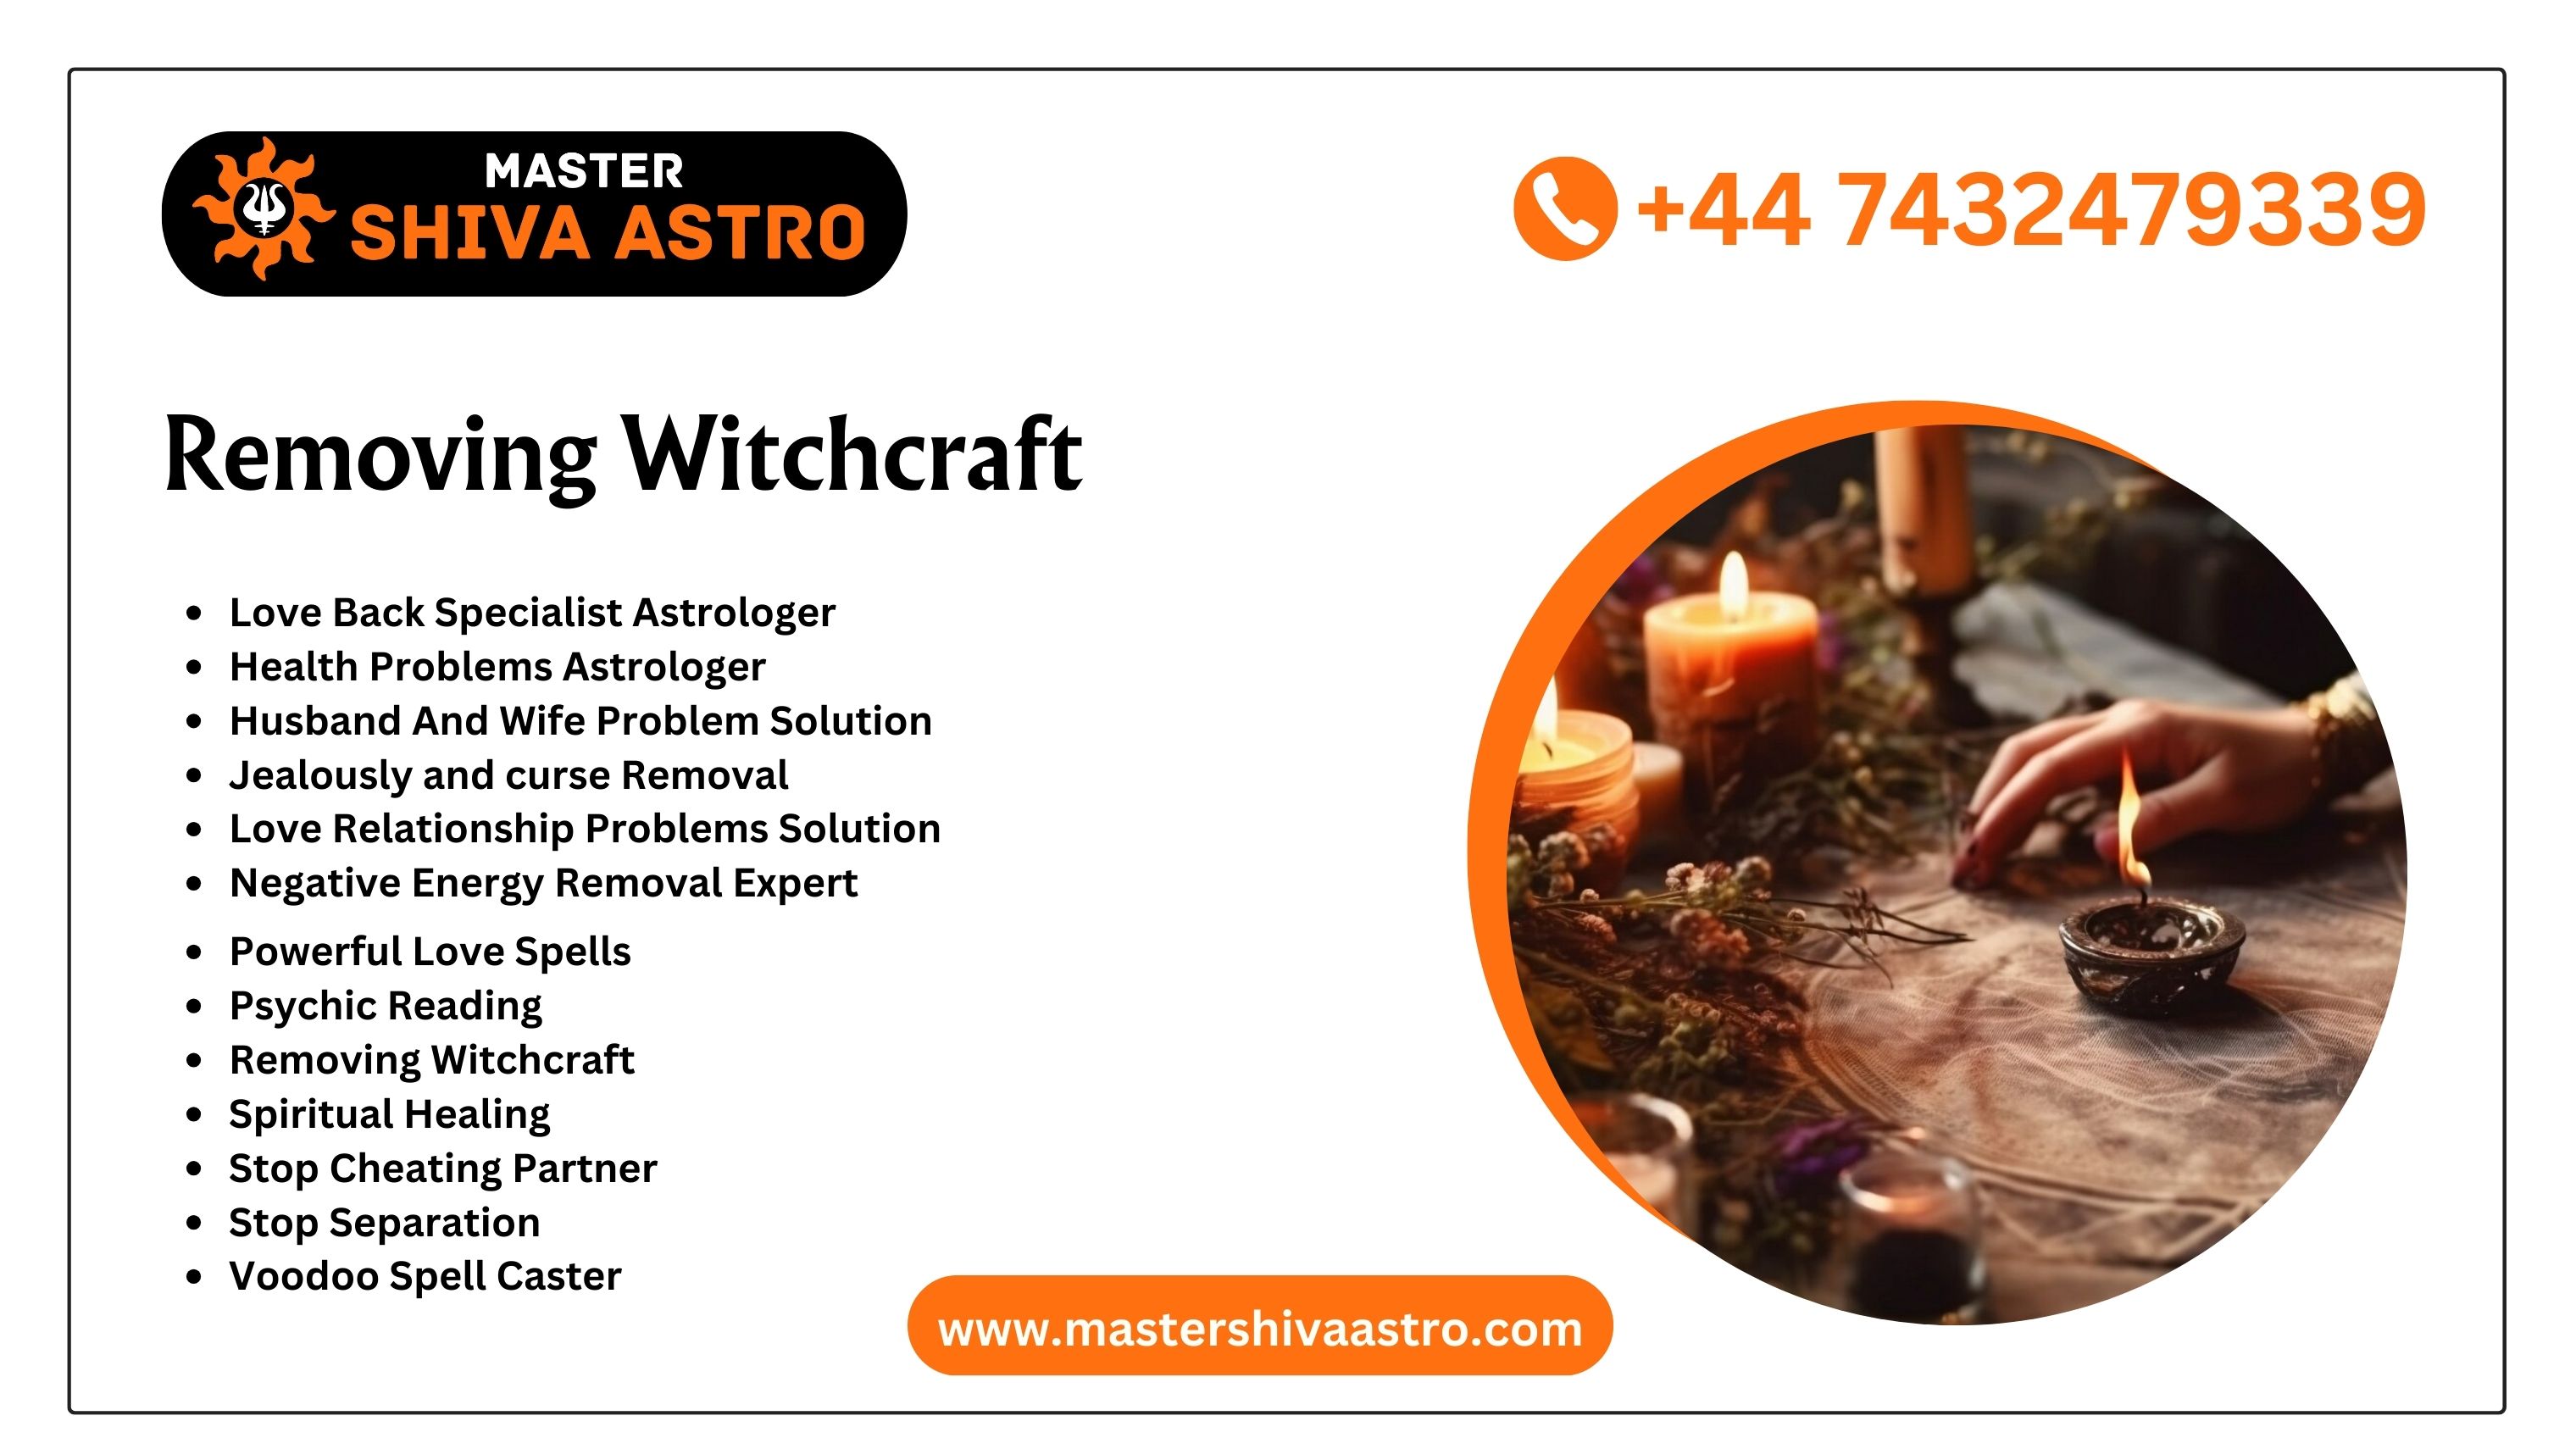 Remove Witchcraft Solutions - Master Shiva